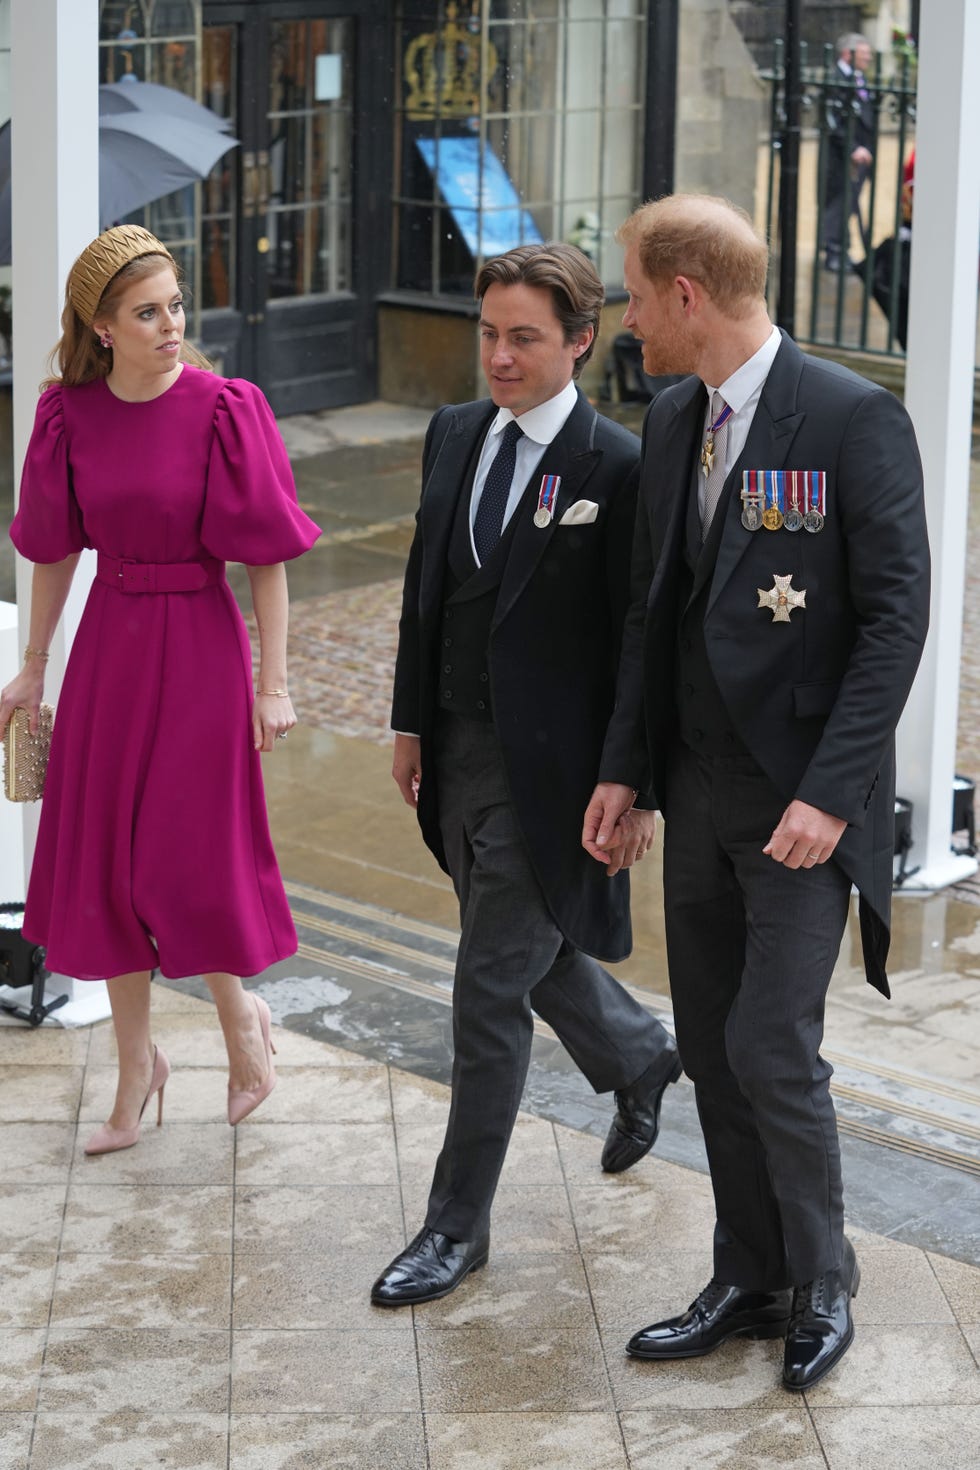 Princess Beatrice looks radiant in pink dress at the Coronation